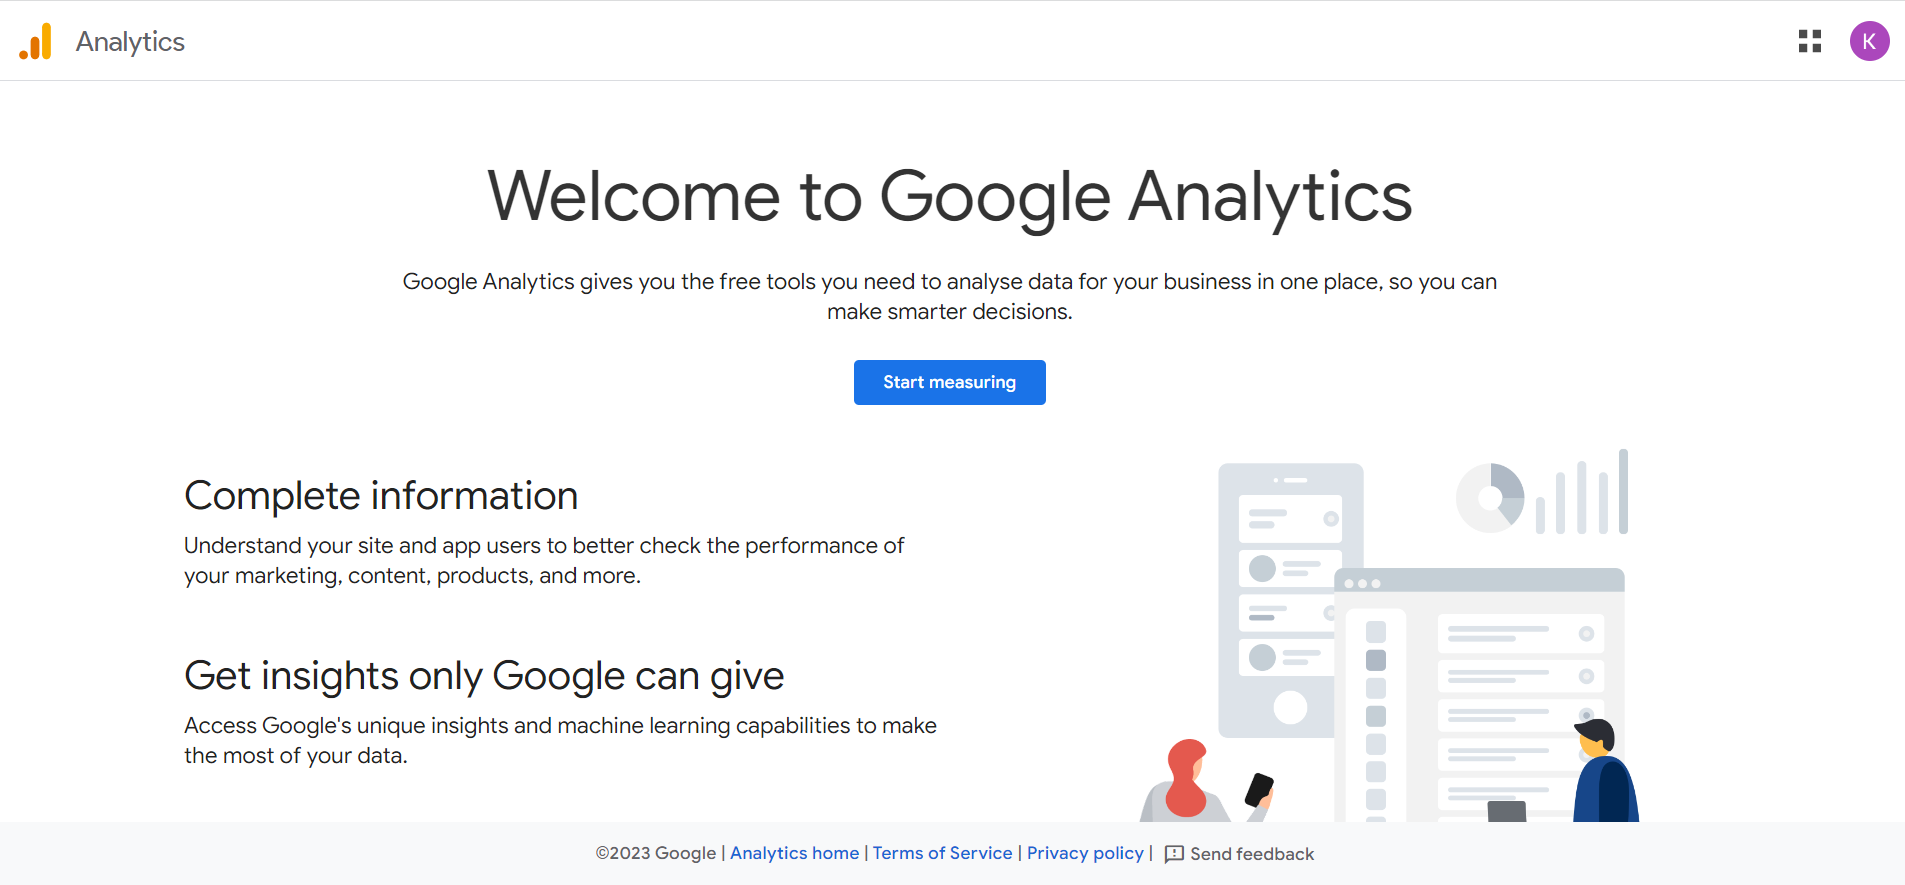 google analytics, a free seo tool to get insights into your web traffic